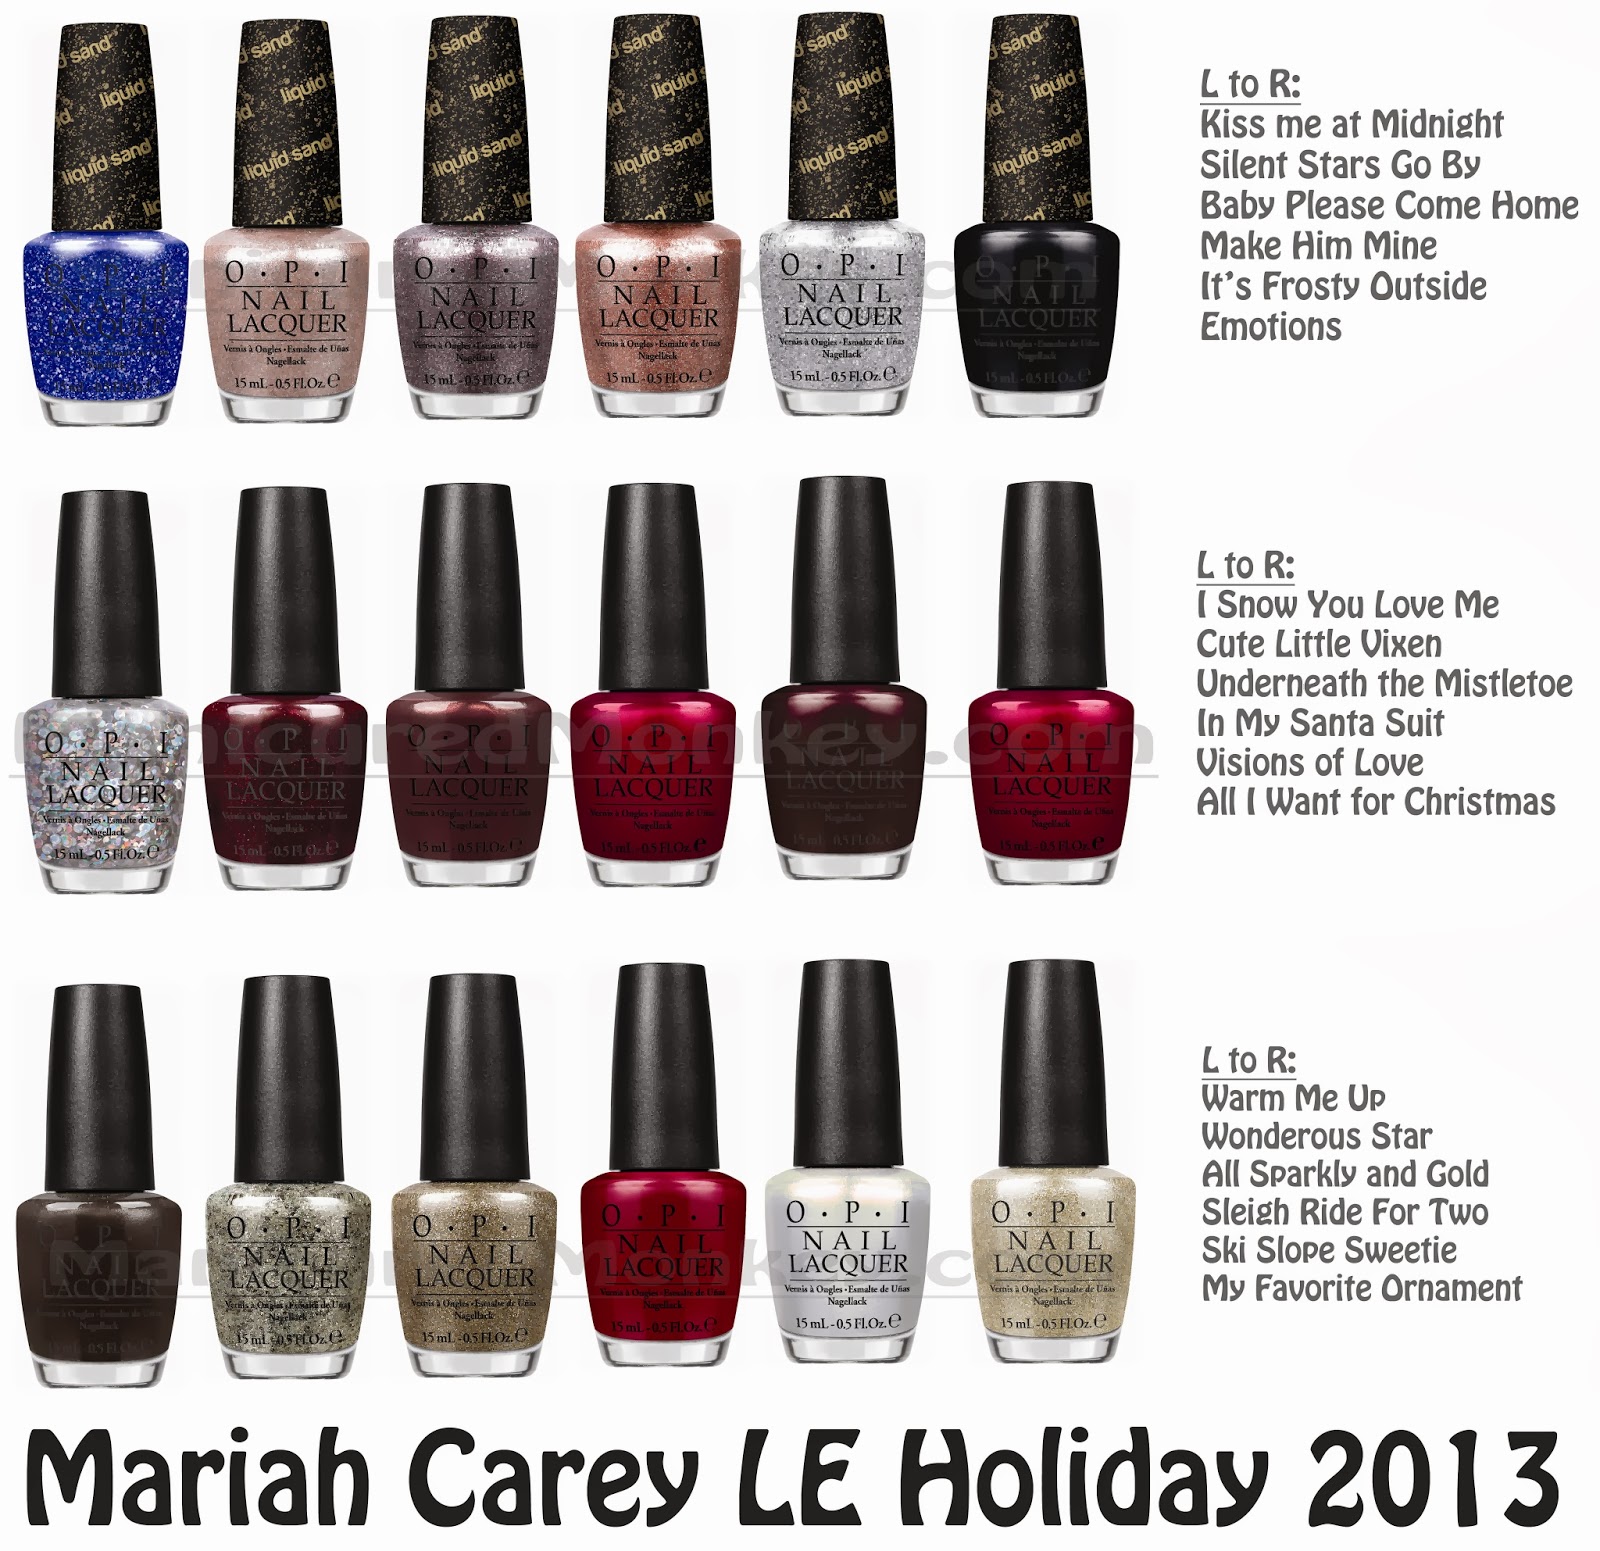 The Manicured Monkey: OPI: Mariah Carey Holiday 2013- press release